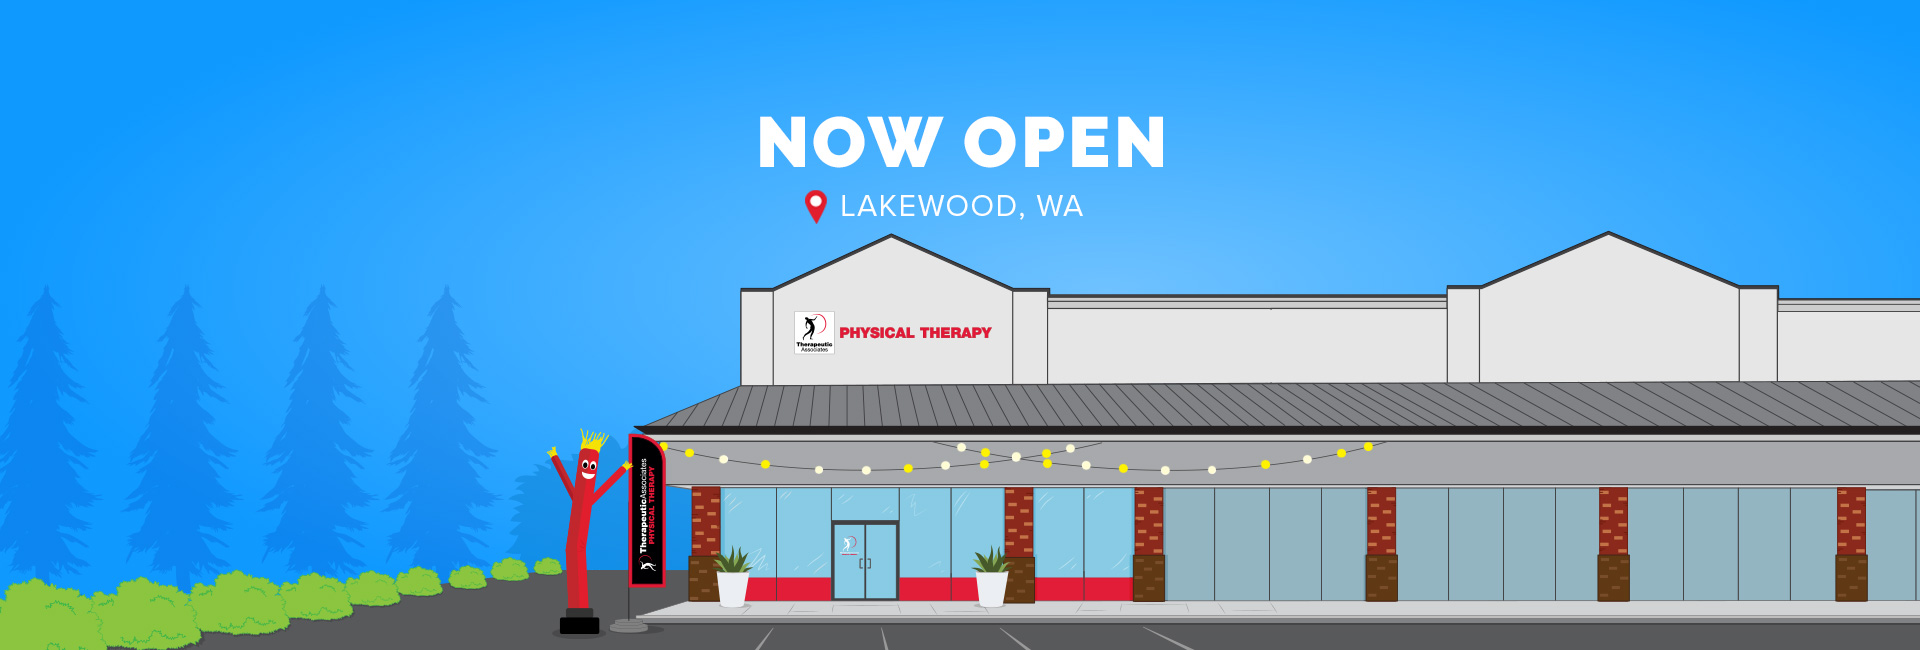 Therapeutic Associates Physical Therapy - Lakewood